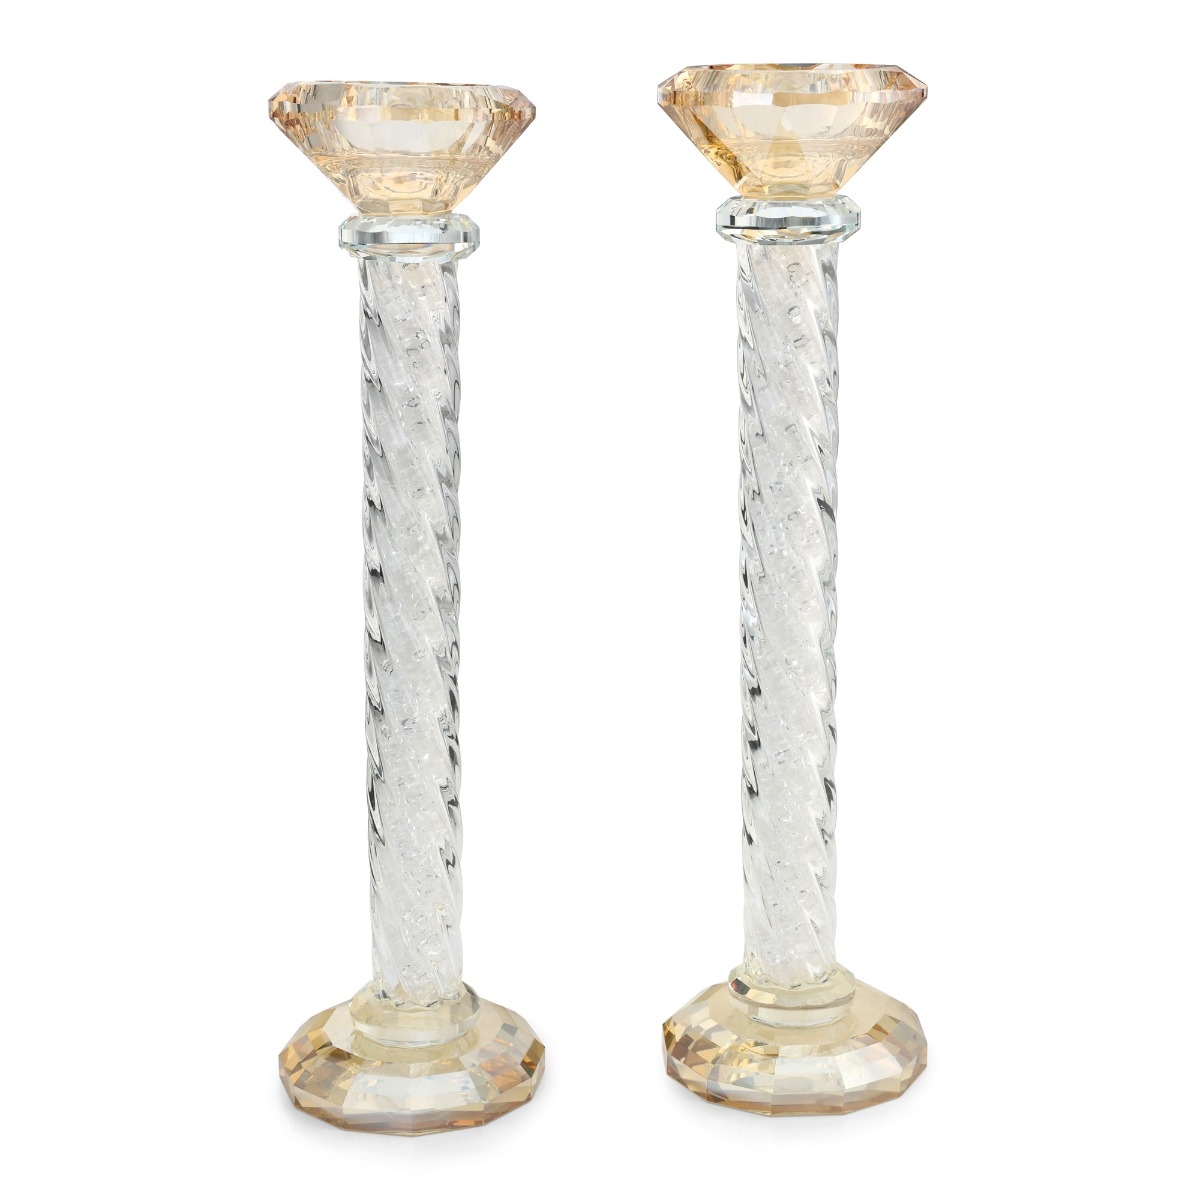 Tall Crystal Candlesticks with Yellow Tint - 1